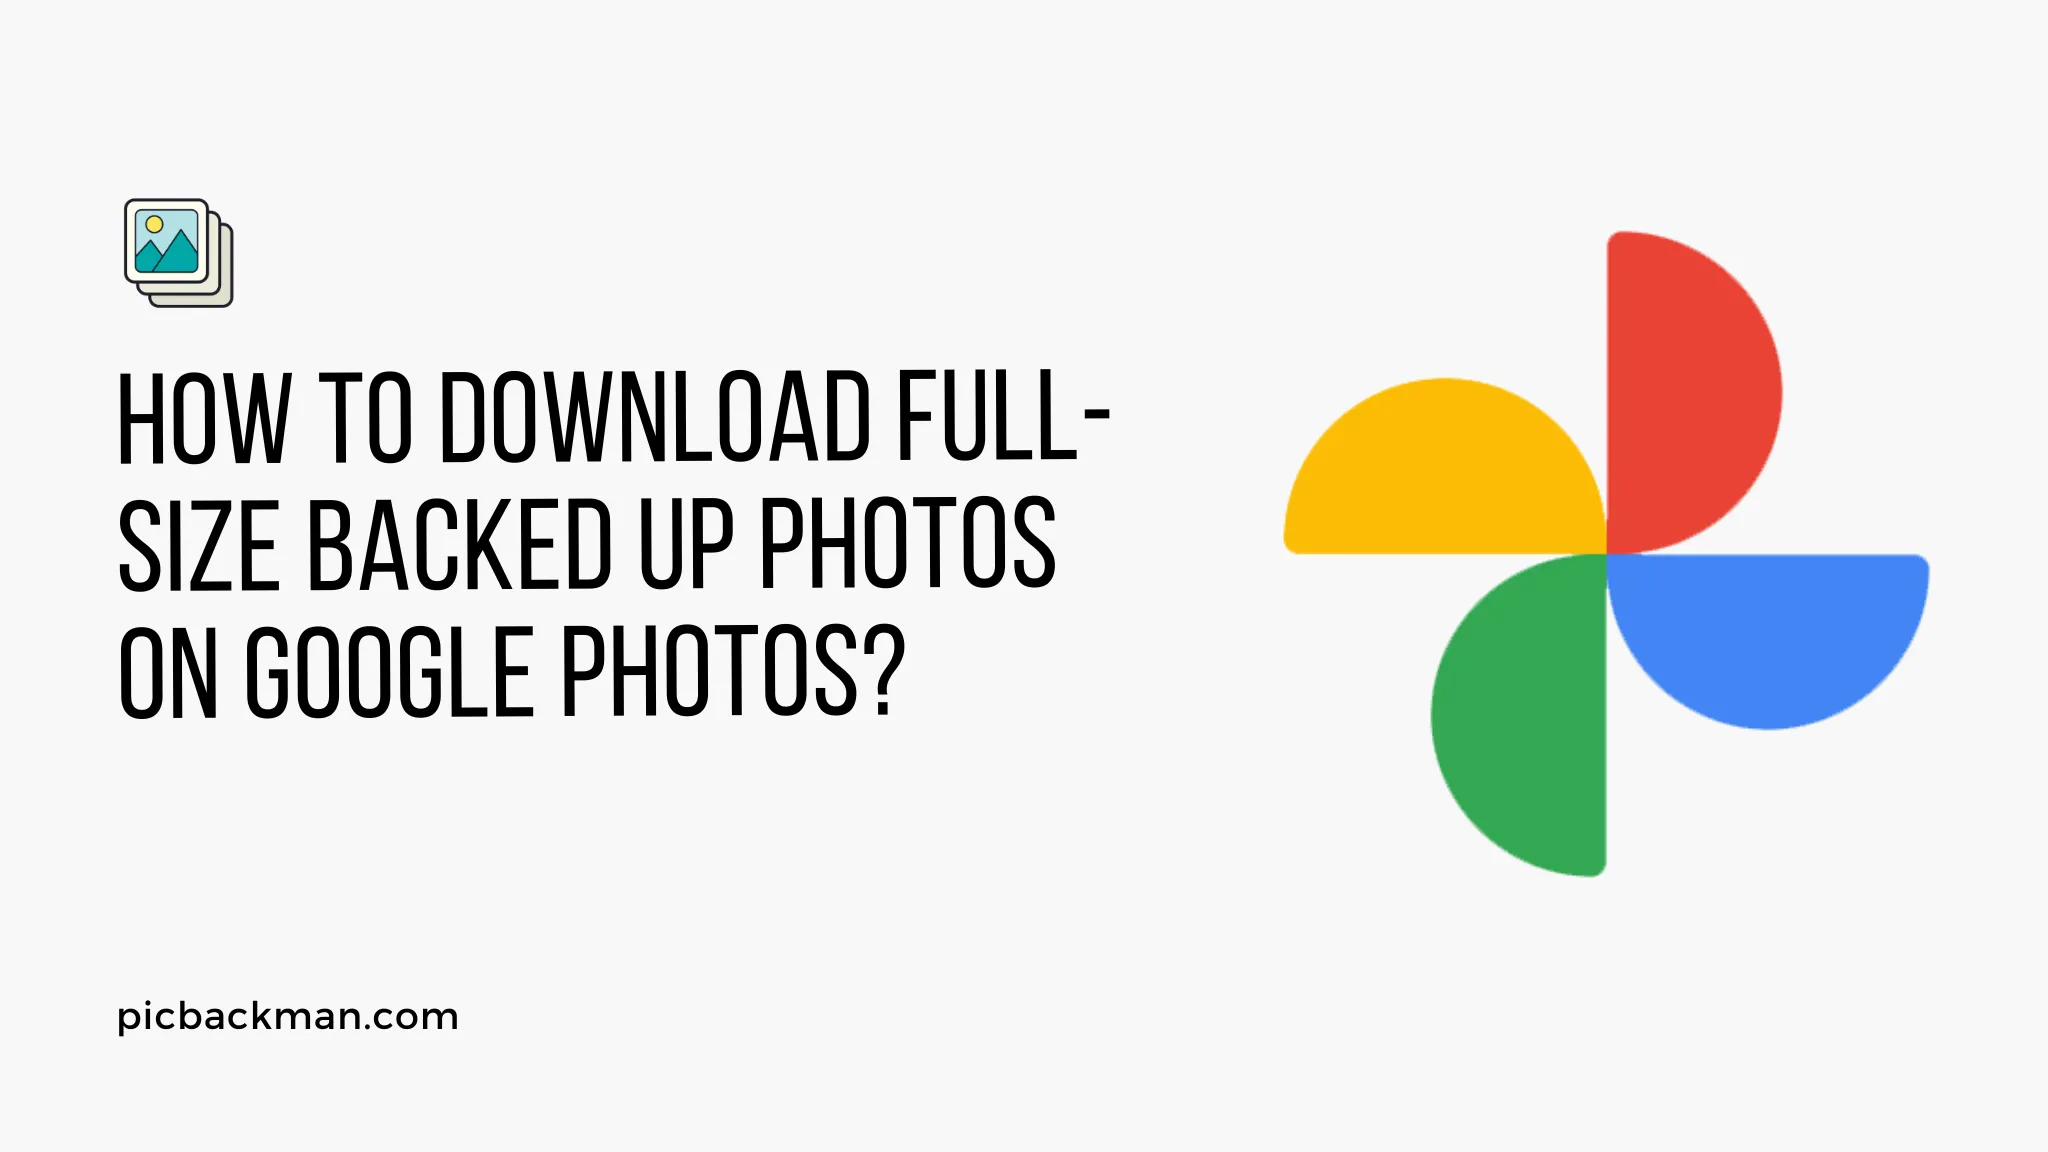 How to Download Full-size Backed up Photos on Google Photos